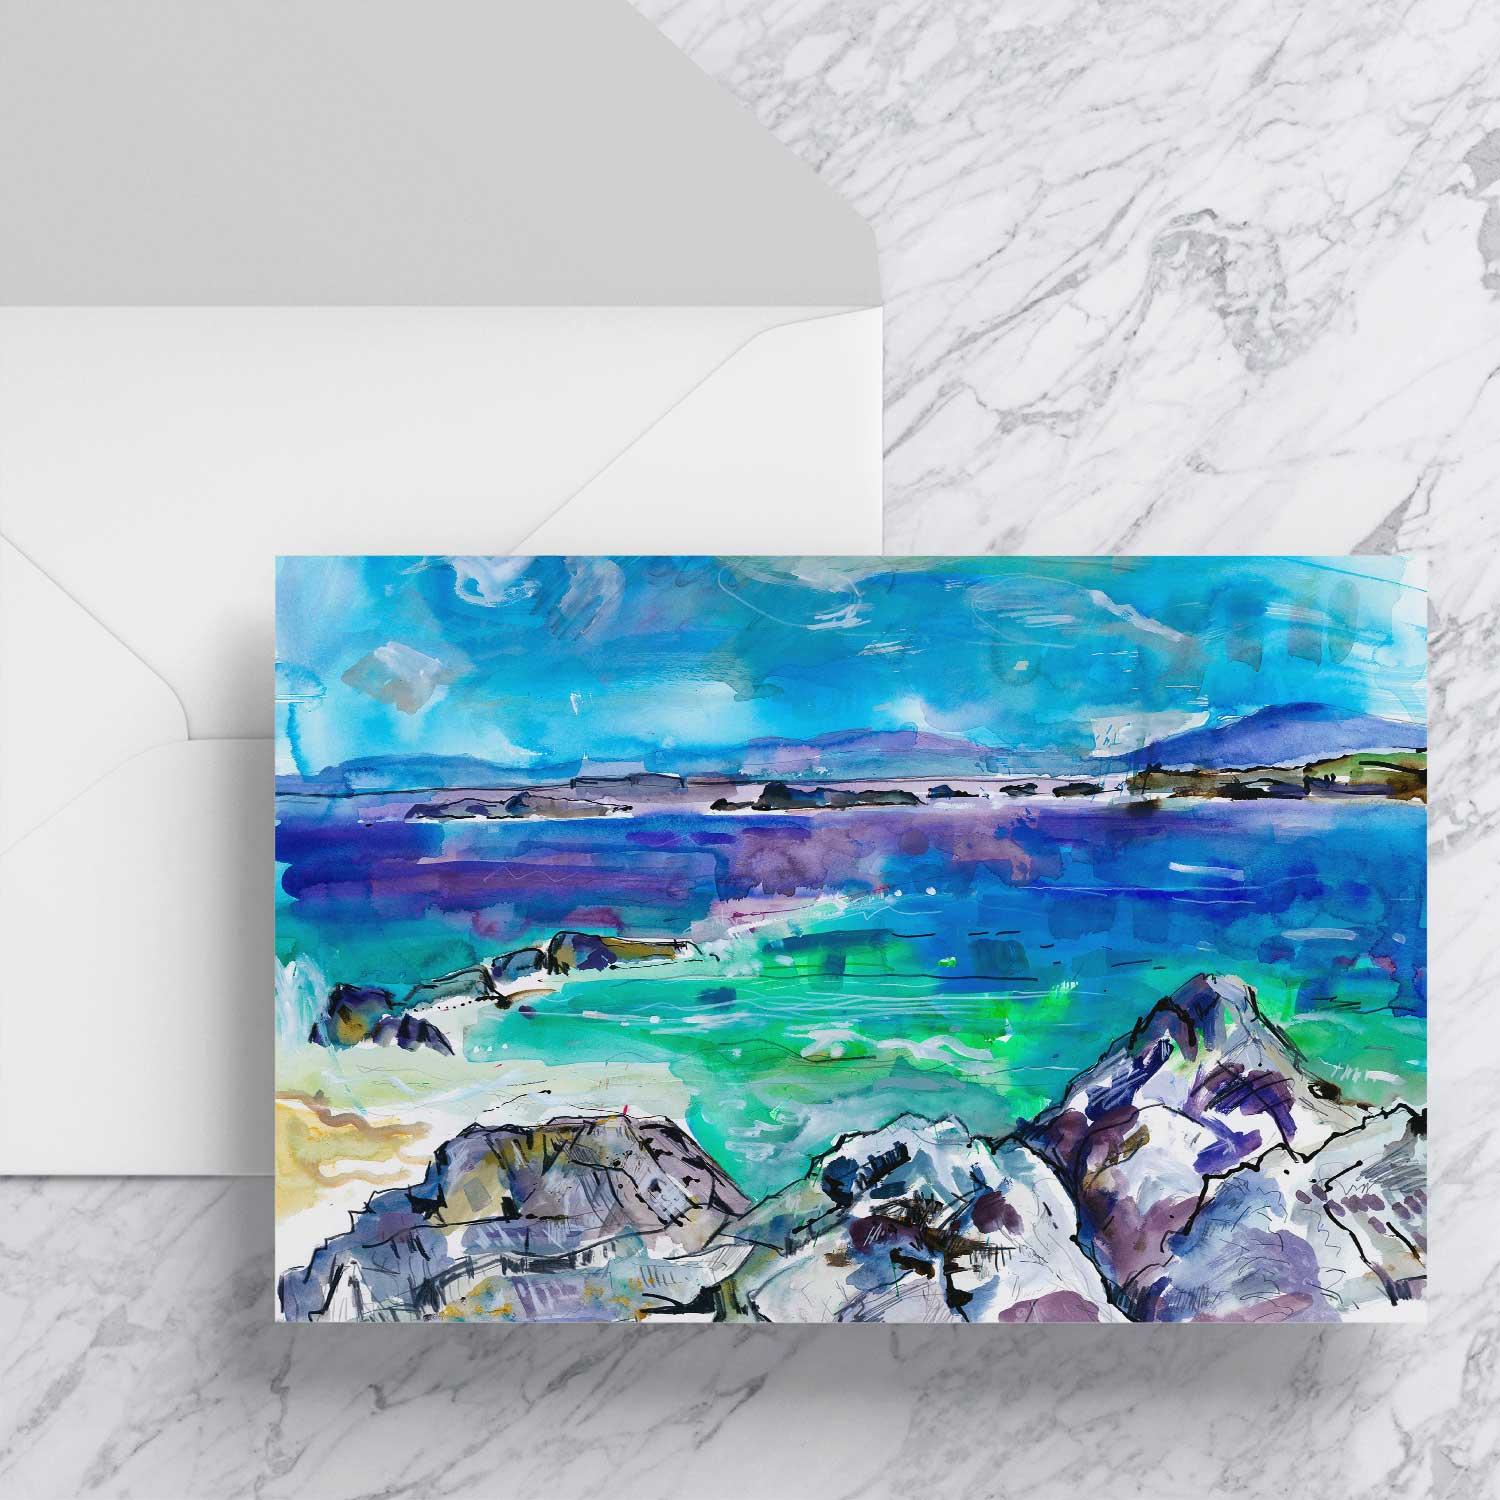 Spring, Iona Greeting Card from an original painting by artist Clare Arbuthnott